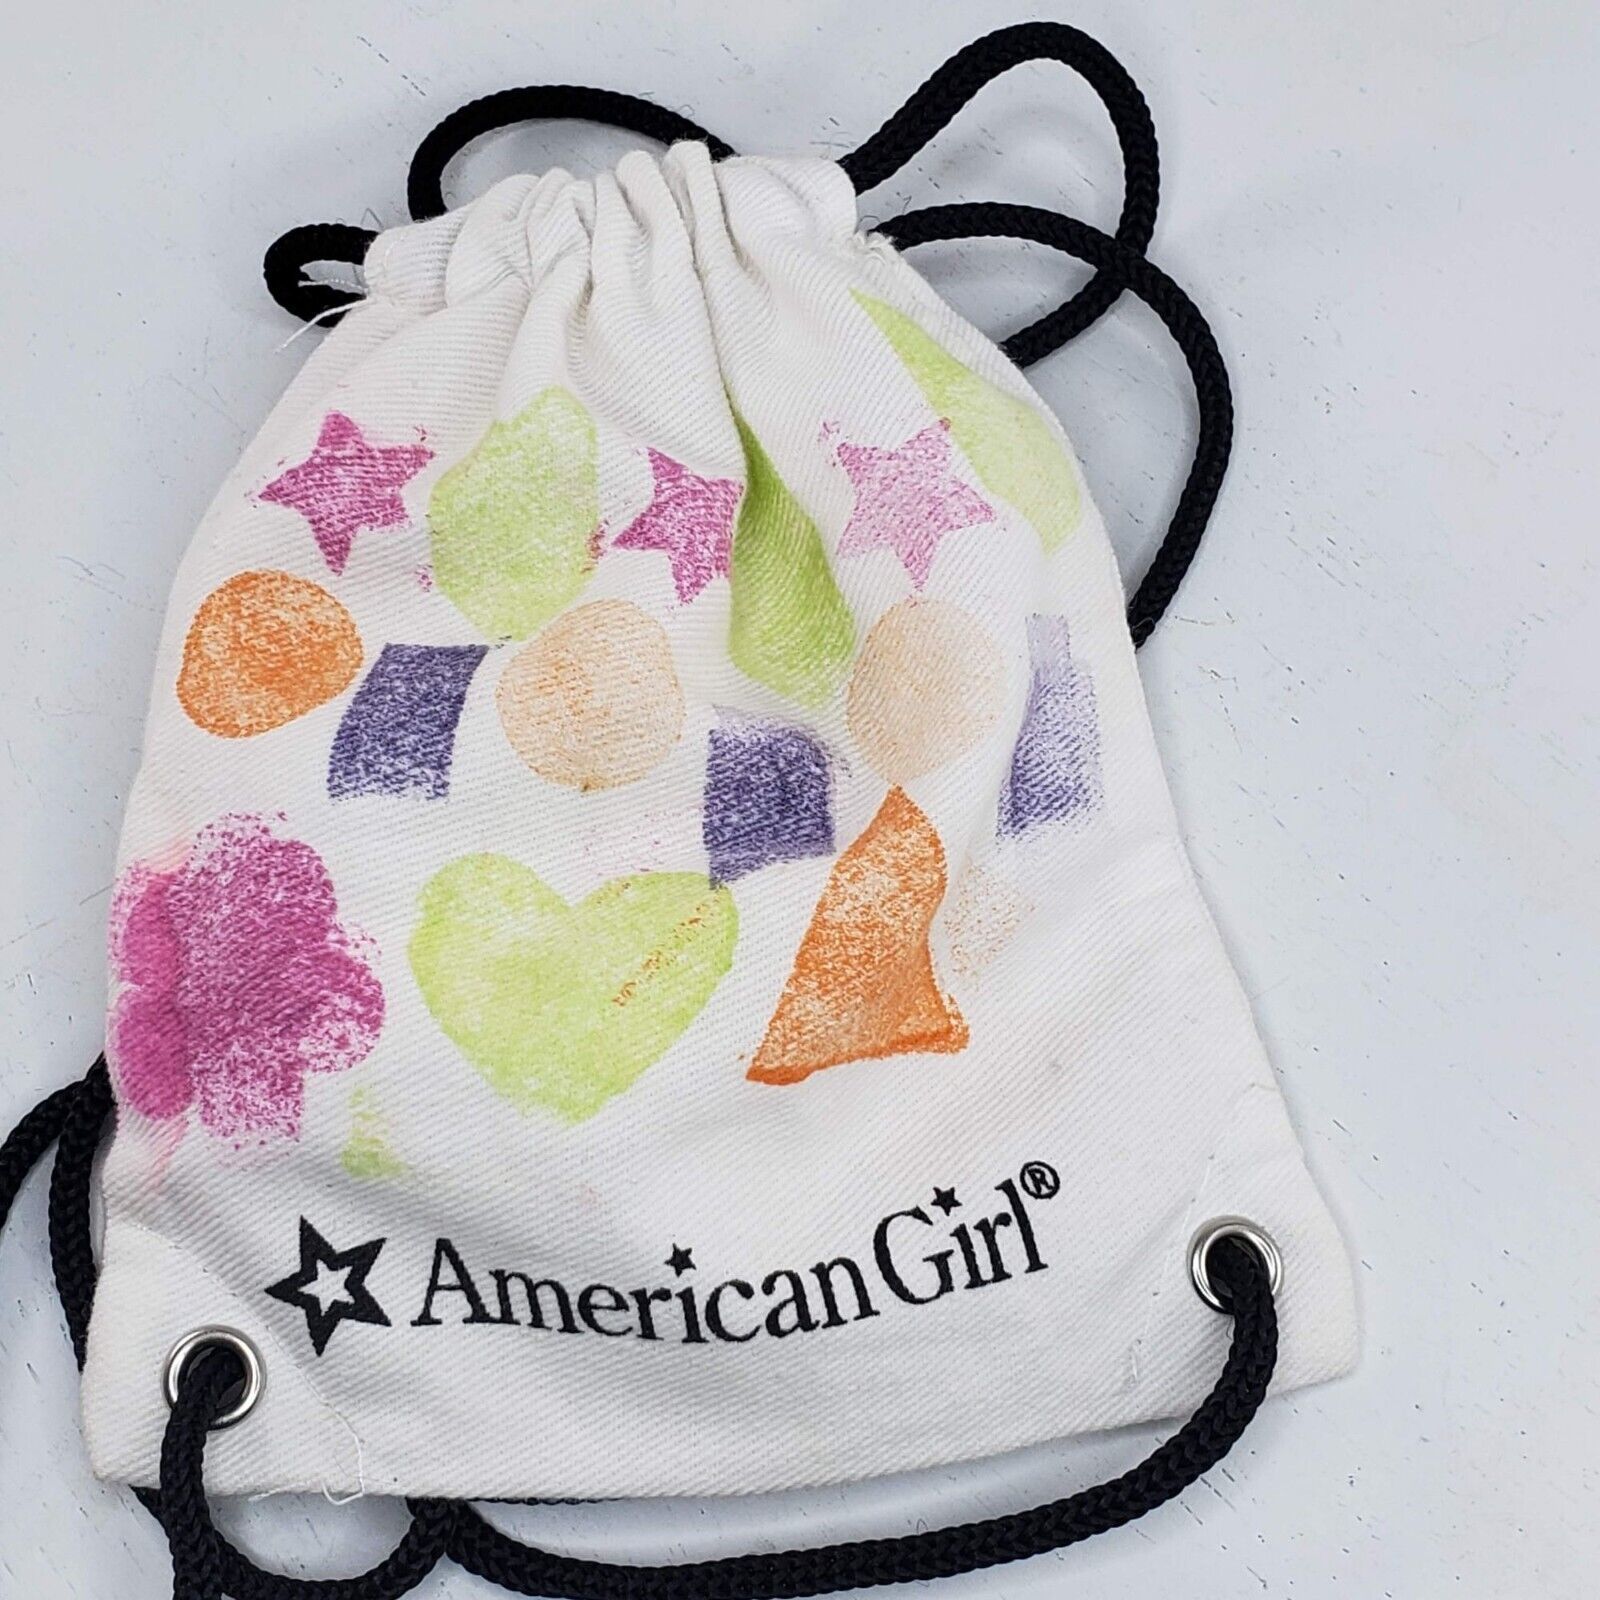 American Girl Drawstring Backpack Bag For 18 Inch Doll Accessory *Flaw* - $9.99